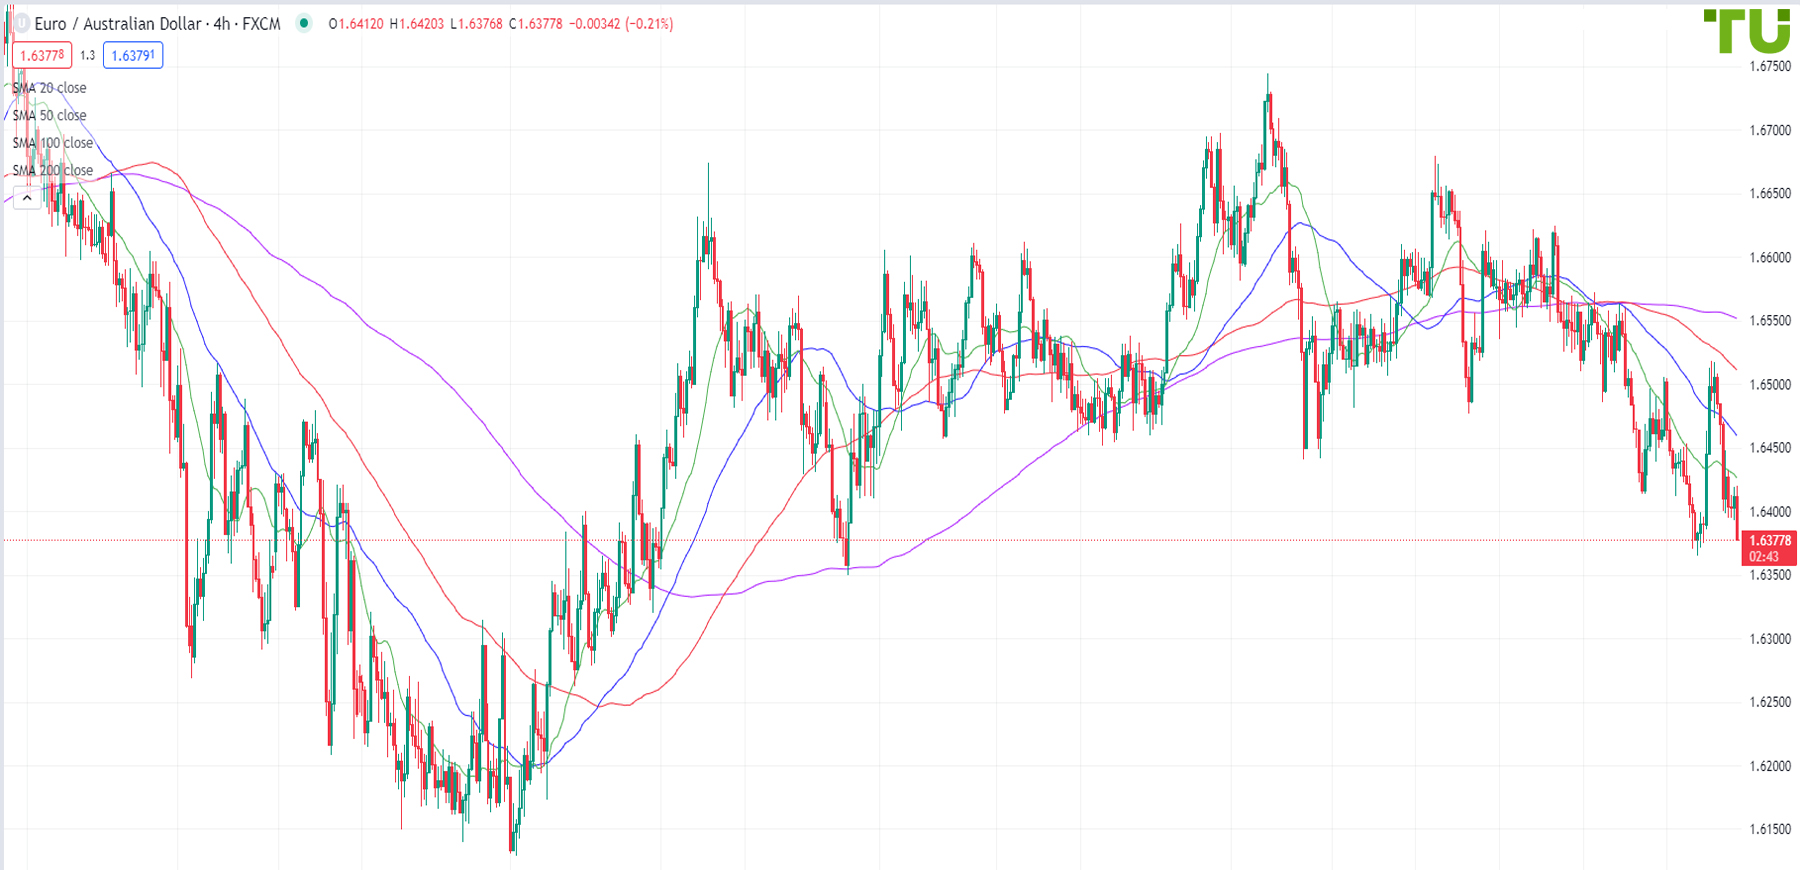 Euro/Aussie returned to the support at 1.6380